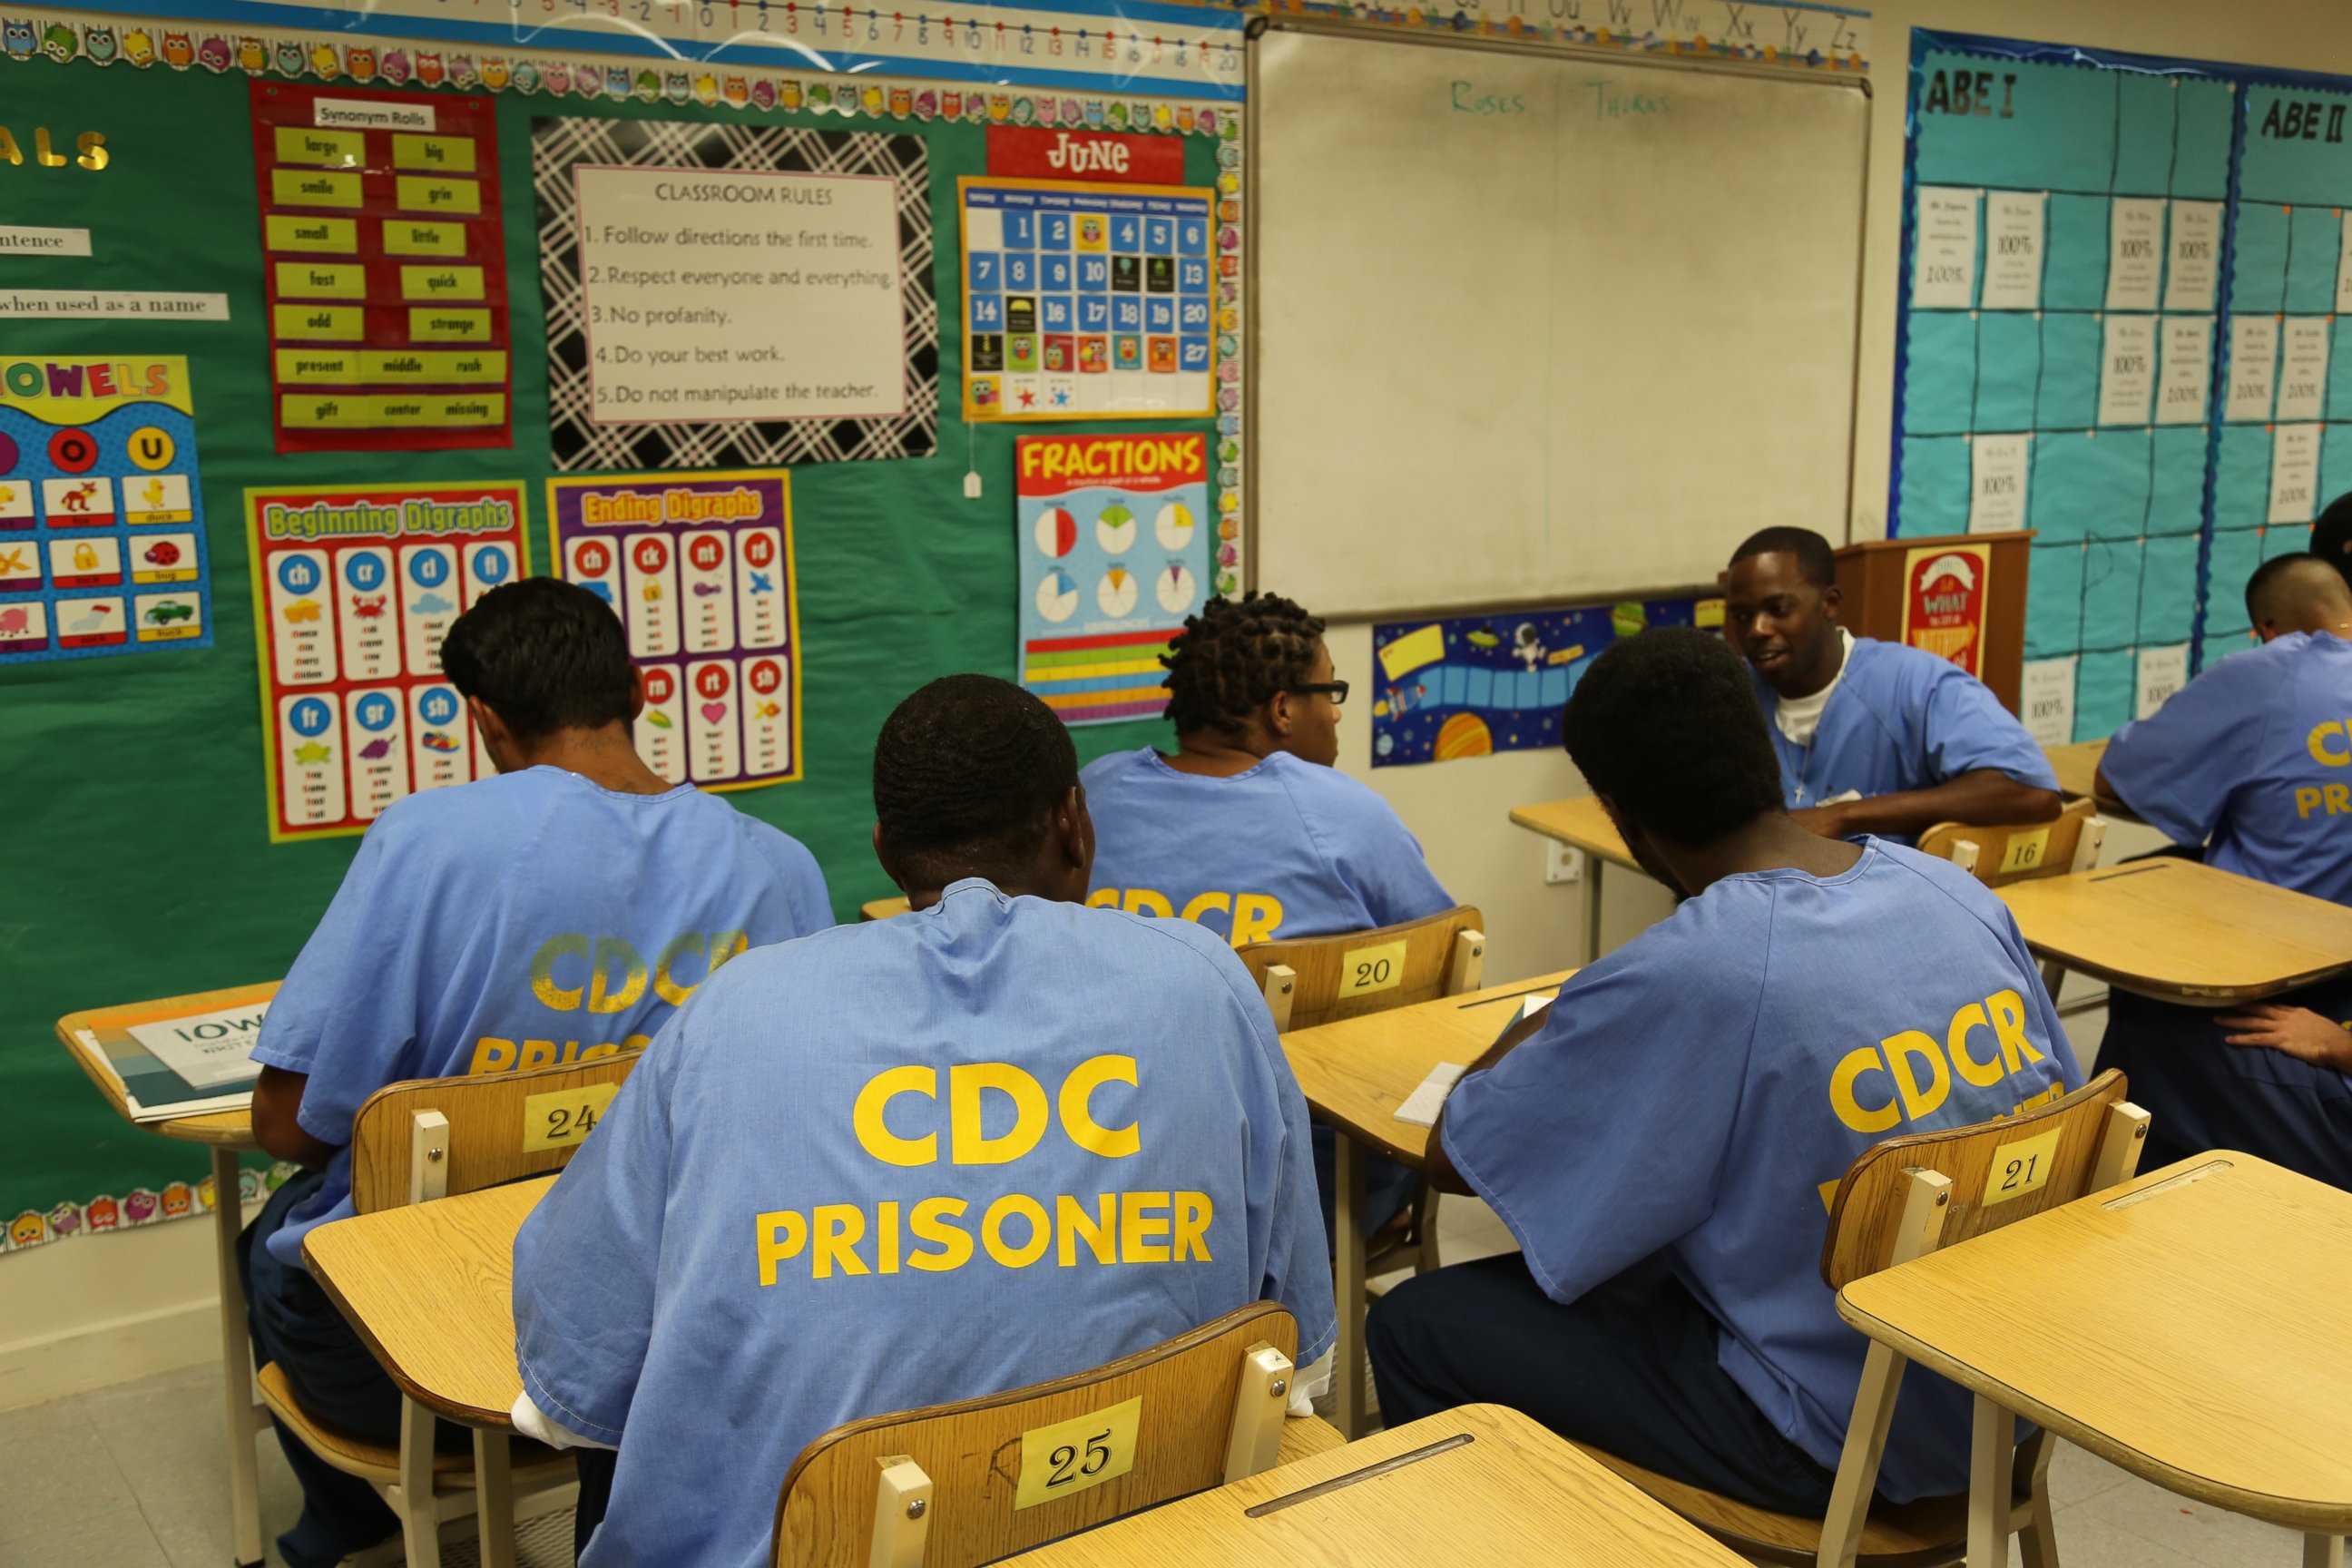 These inmates are participating in a creative writing class called "Inside Out Writers," a program that uses creative writing to educate and inspire positive prison behavior.